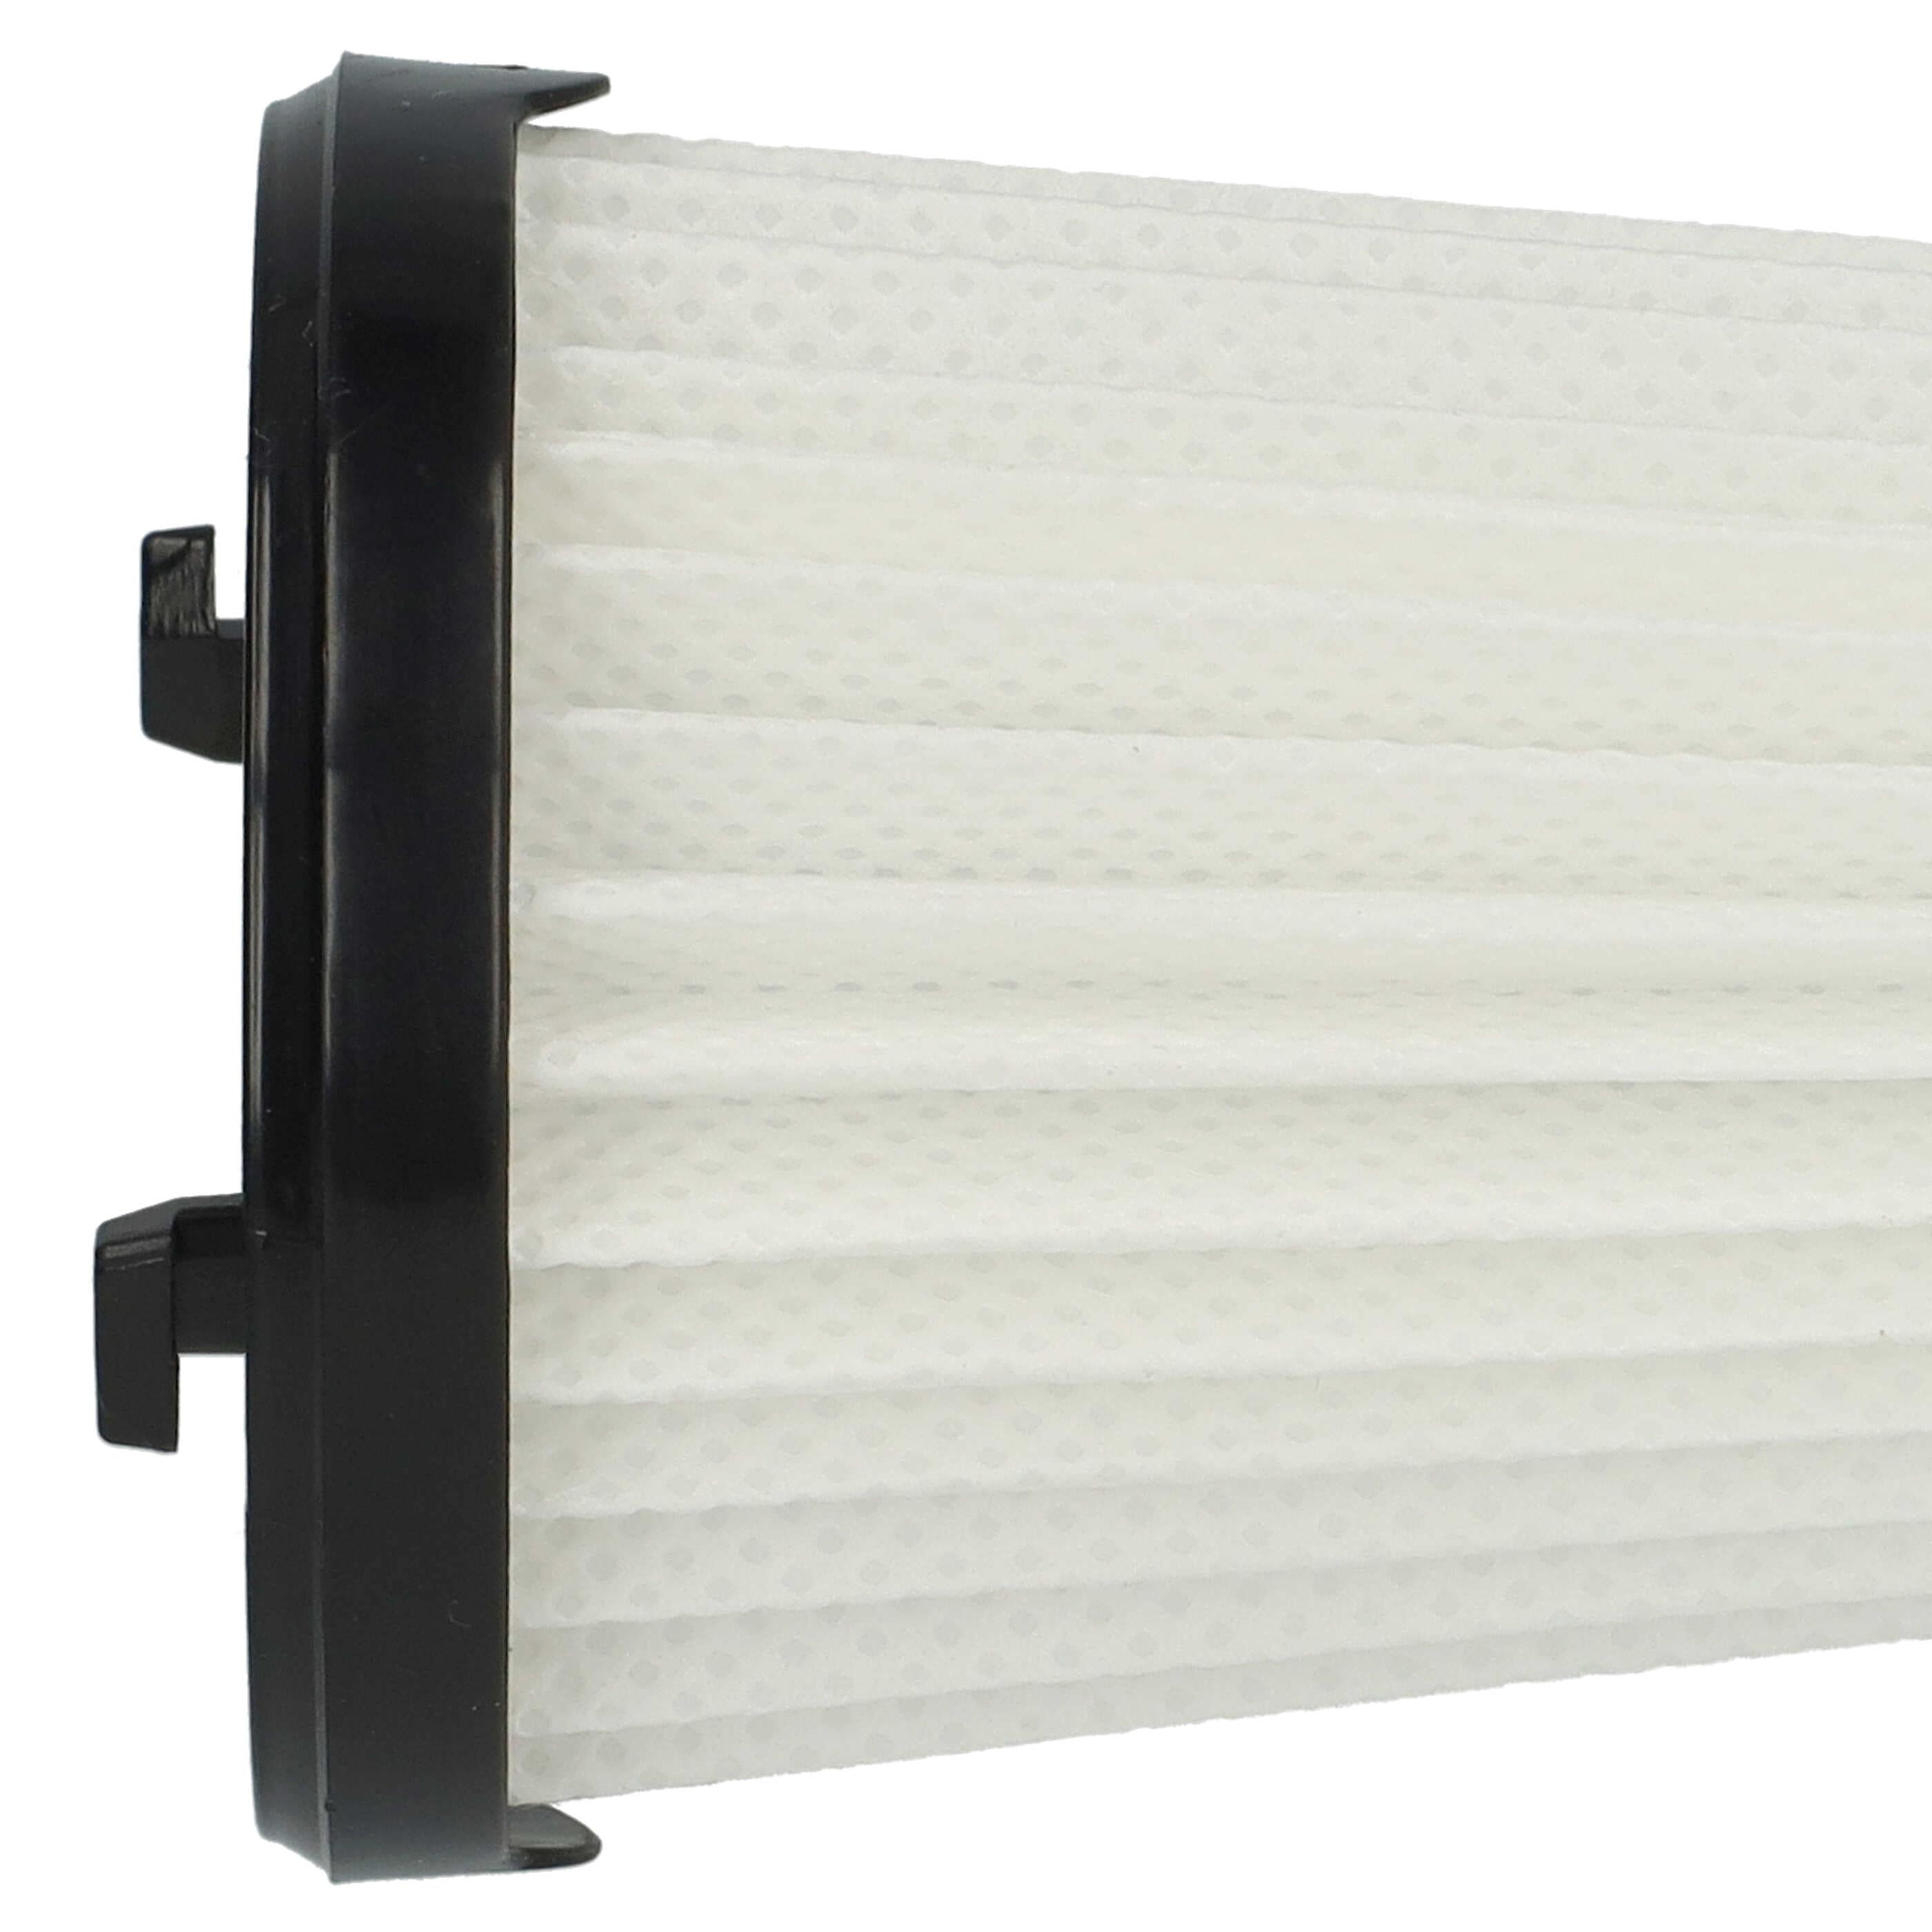 1x pleated filter replaces AEG AEF150, 9001683755, 90094073100 for ElectroluxVacuum Cleaner, black / white